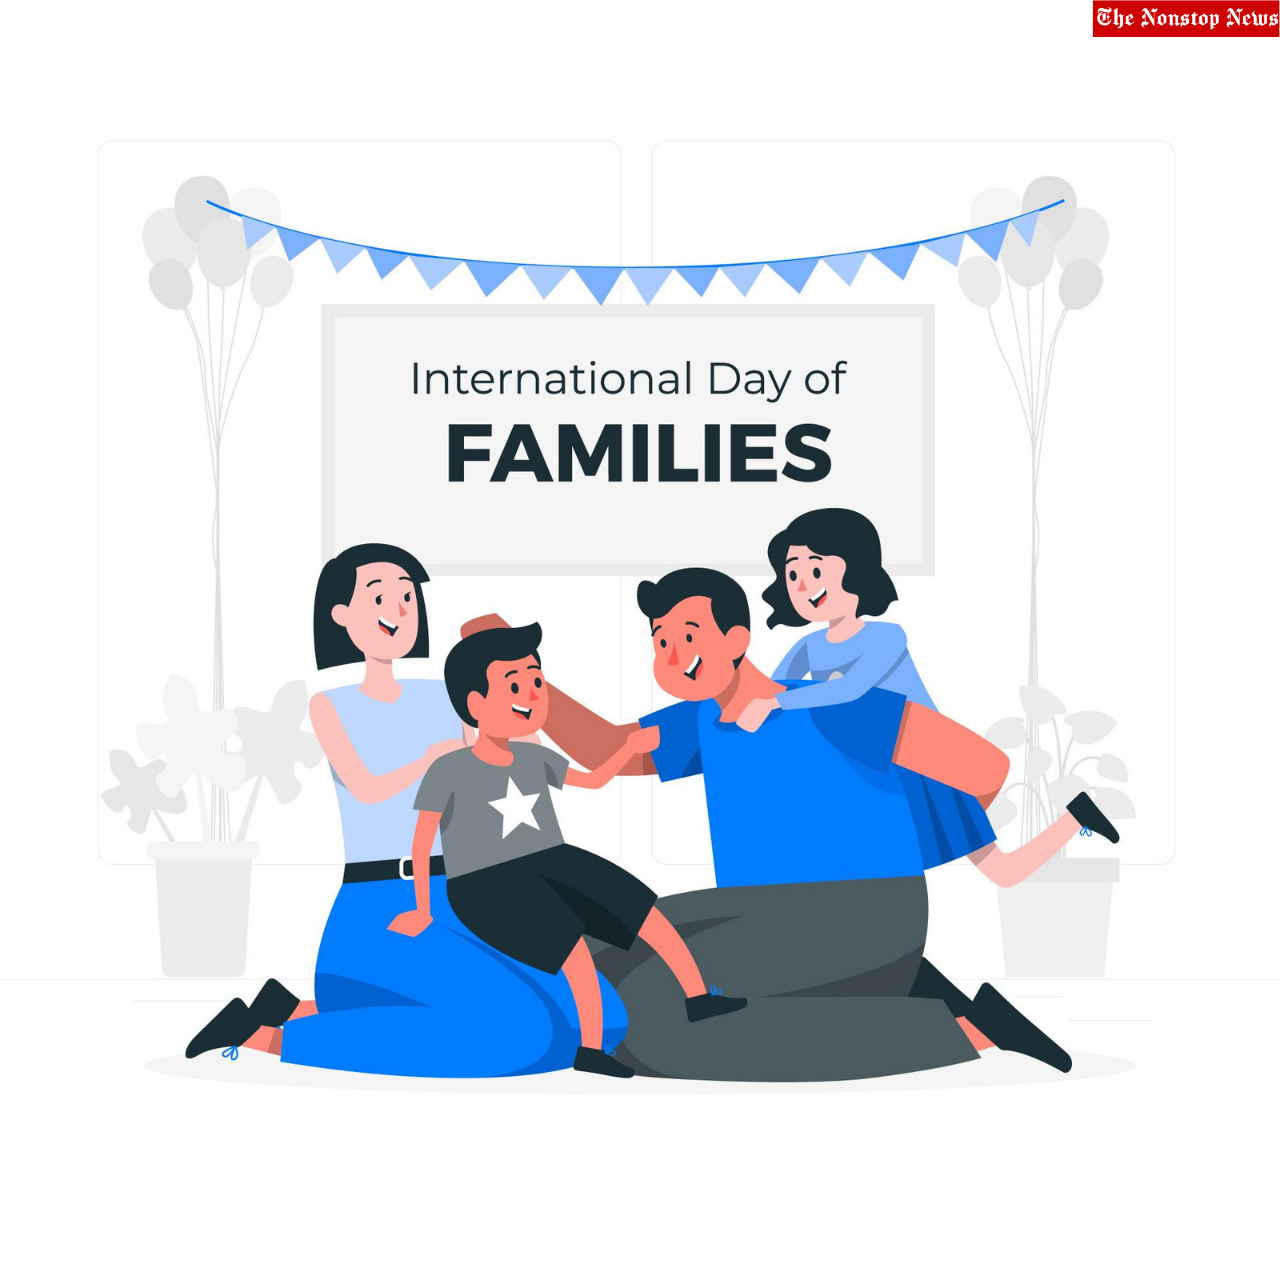 International Day of Families 2022: Best Instagram Captions, Facebook Messages, Twitter Images, Reddit Posters To Share